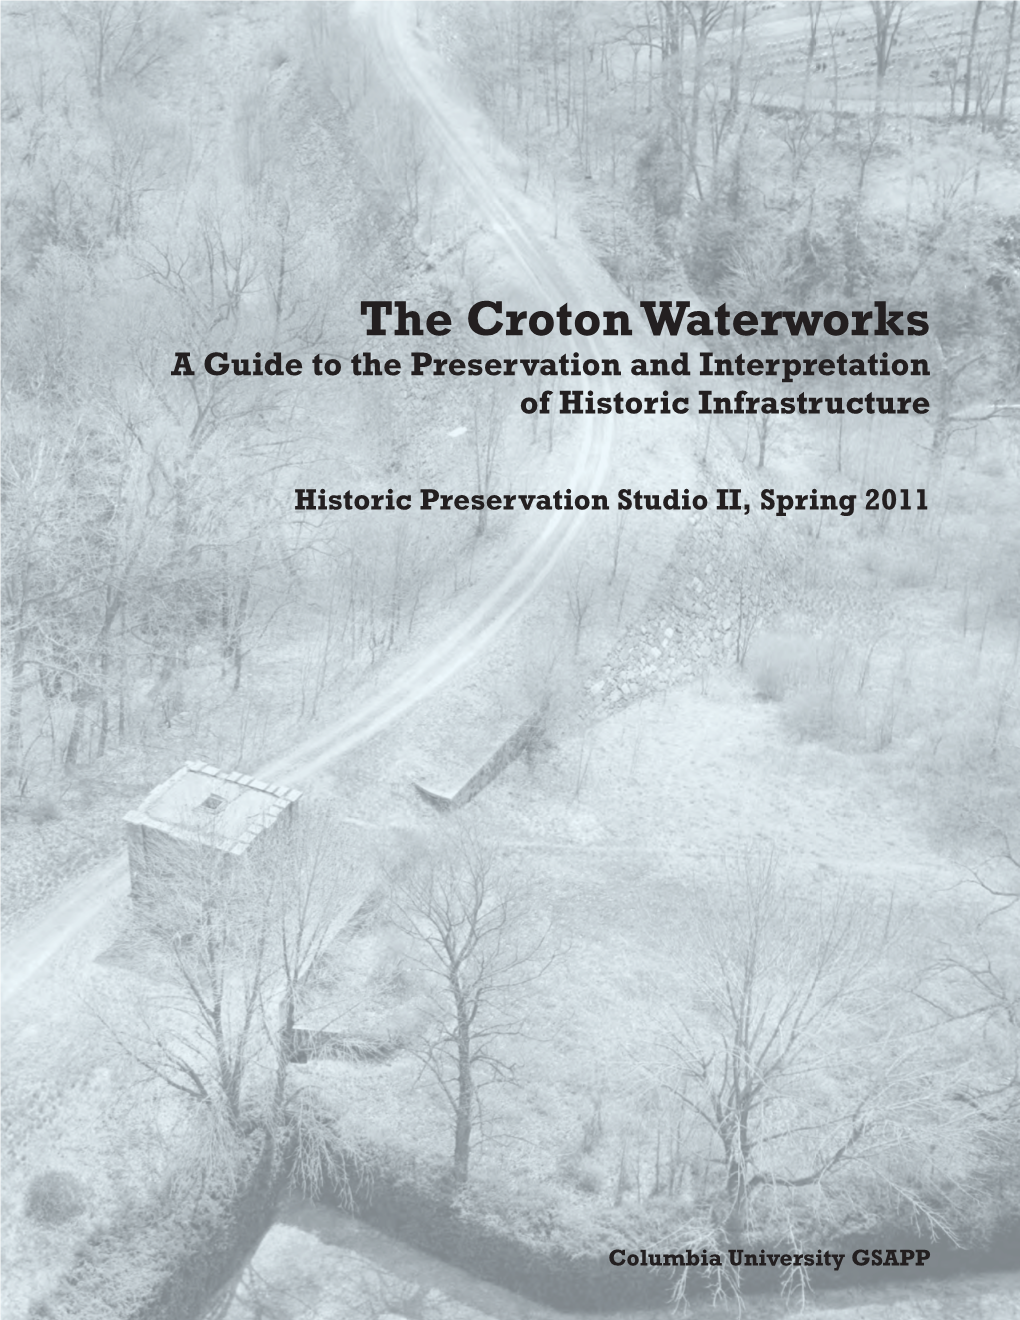 The Croton Waterworks a Guide to the Preservation and Interpretation of Historic Infrastructure